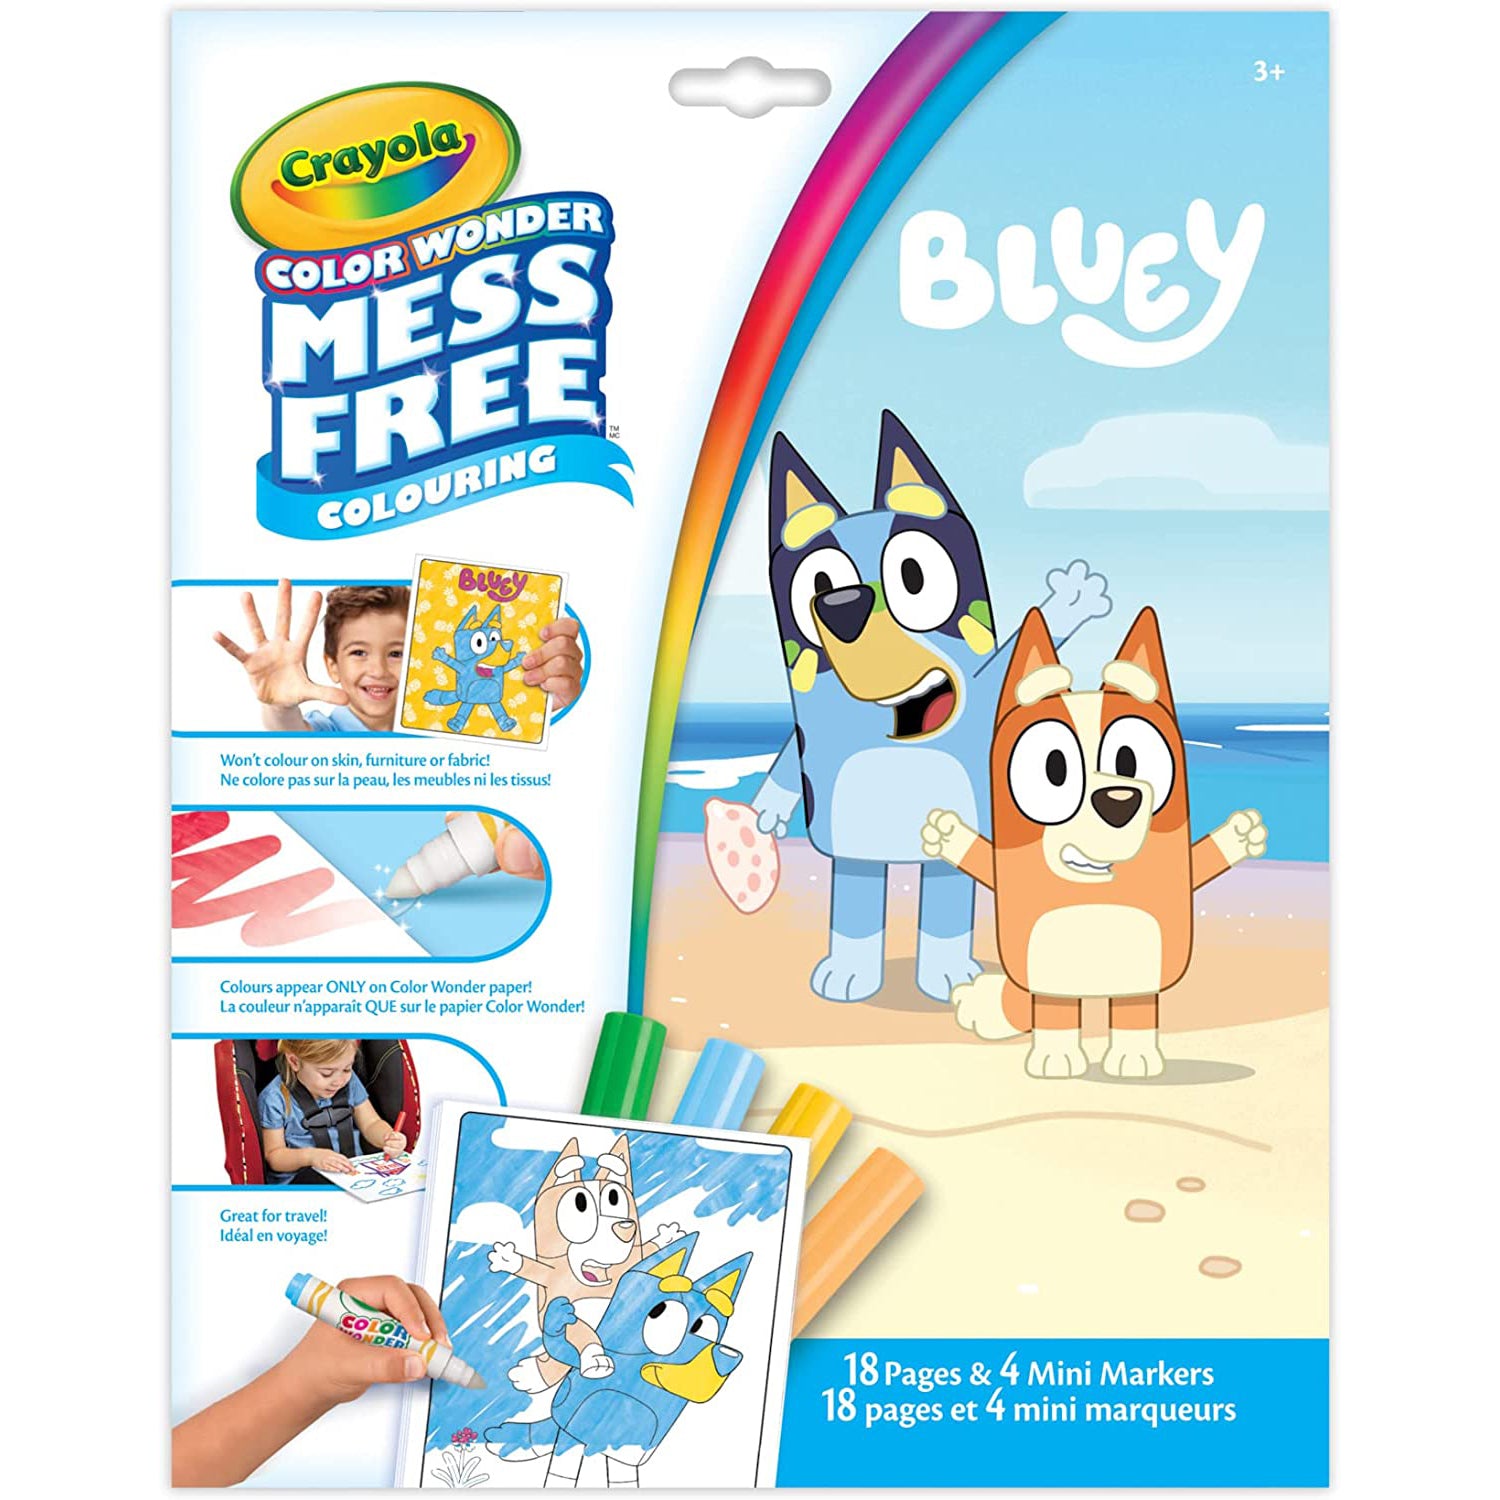 Crayola Color Wonder Mess-Free Colouring Pages & Mini Markers - Bluey